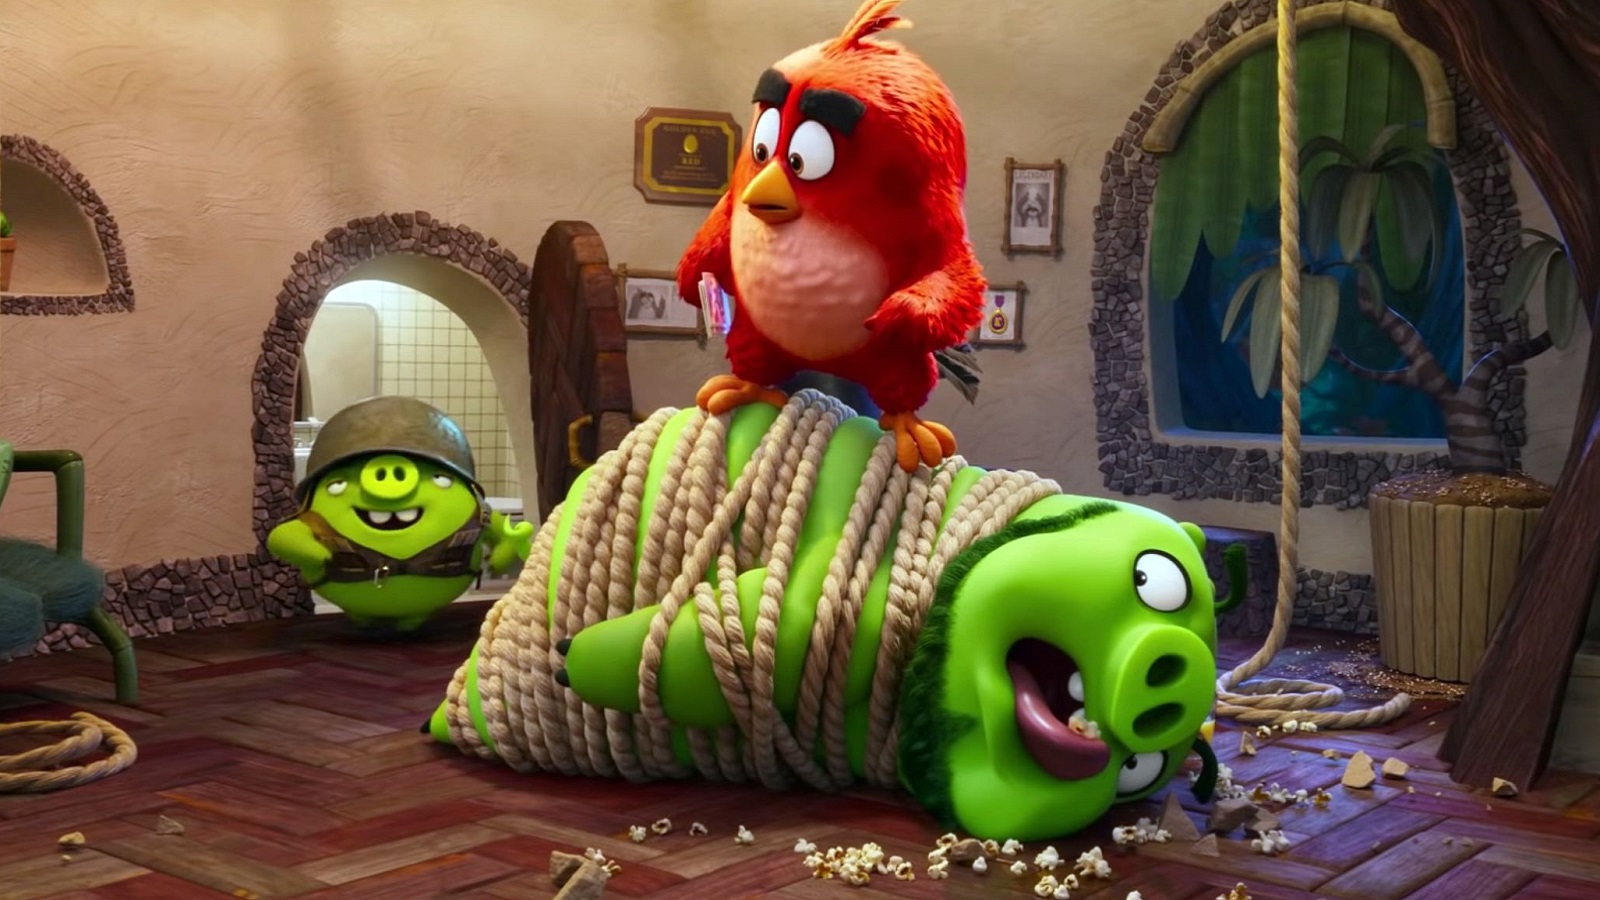 crazy friend in the angry birds movie